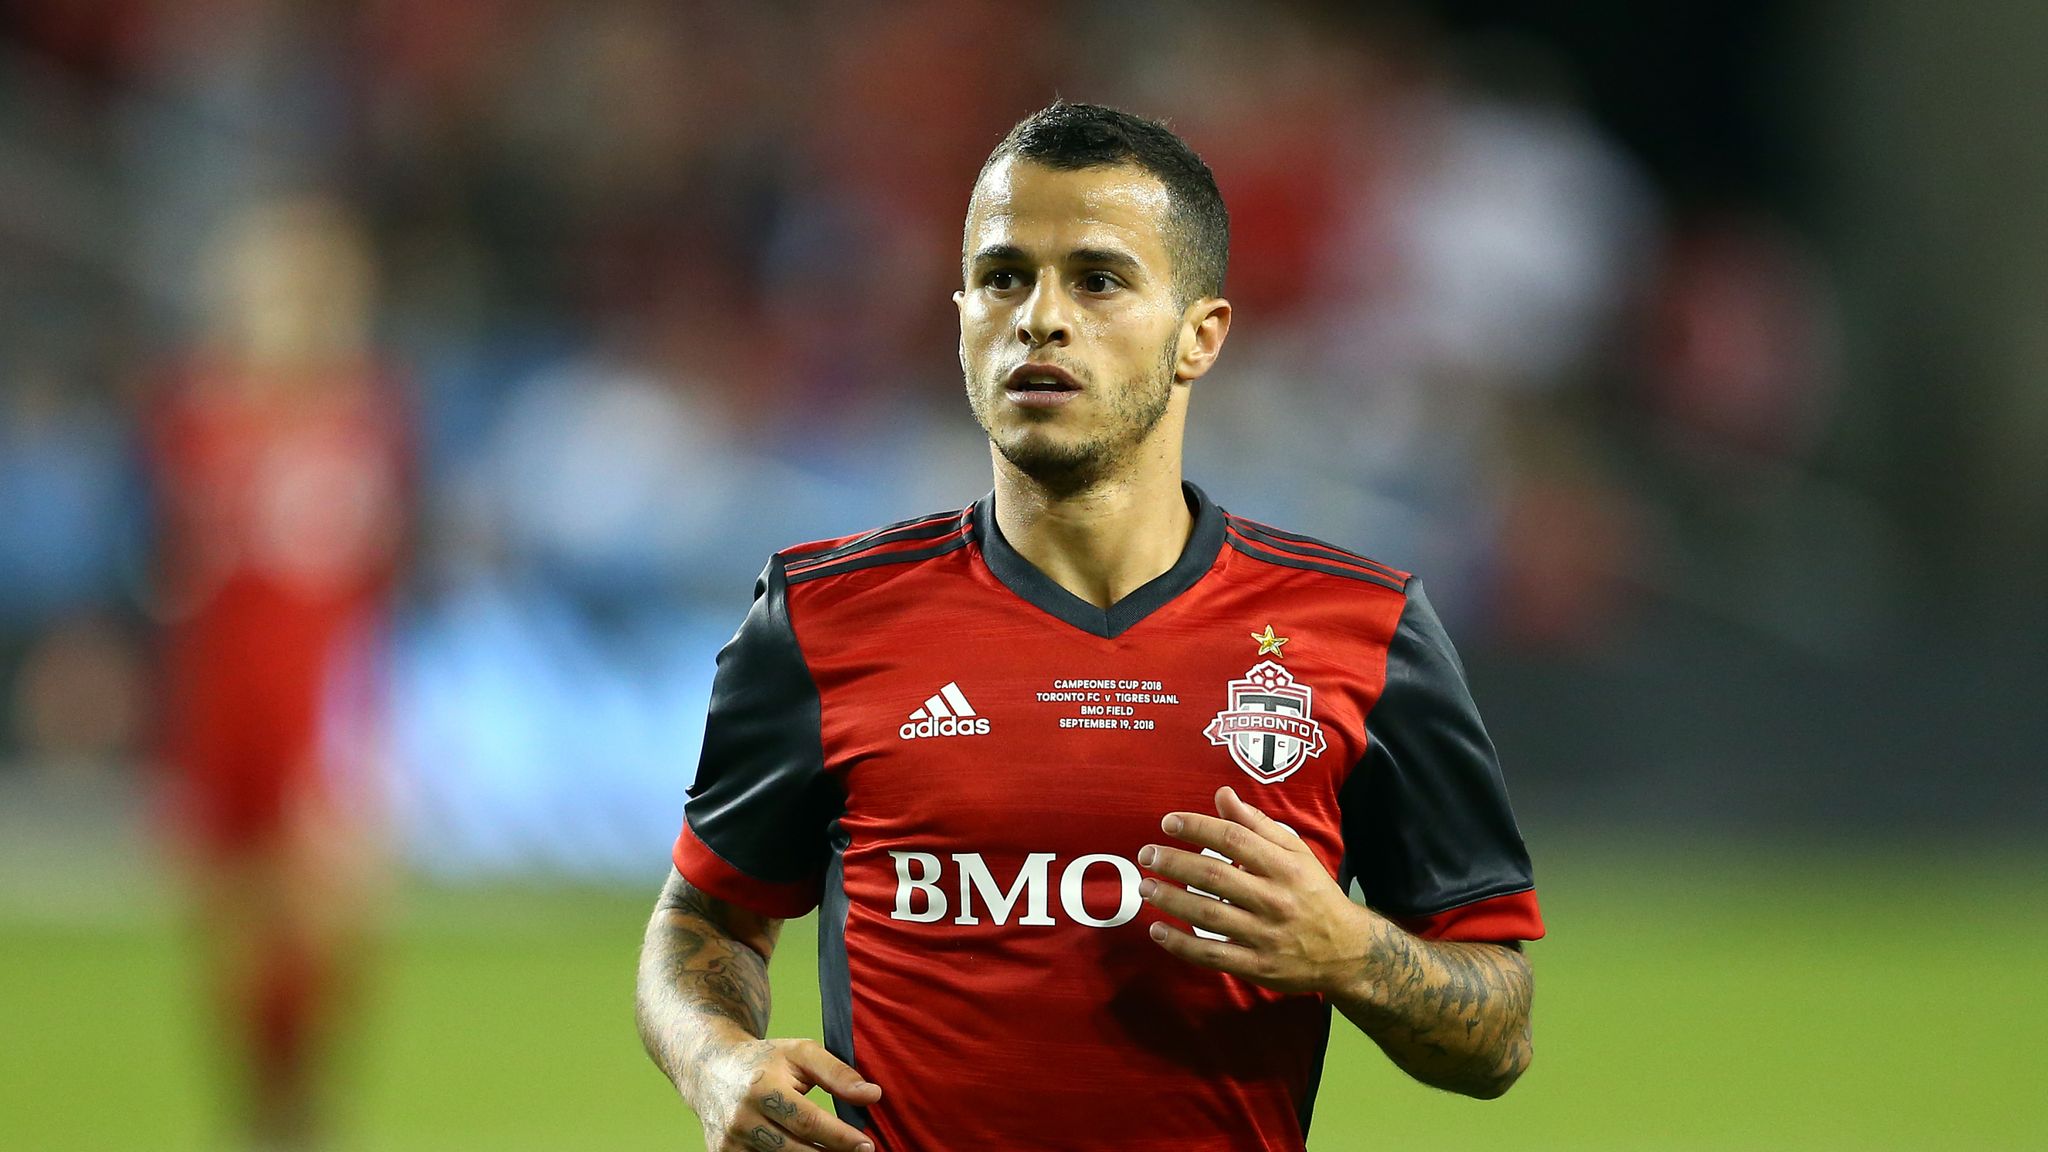 Giovinco signs with Sampdoria, Toronto FC makes deal with Red Bulls